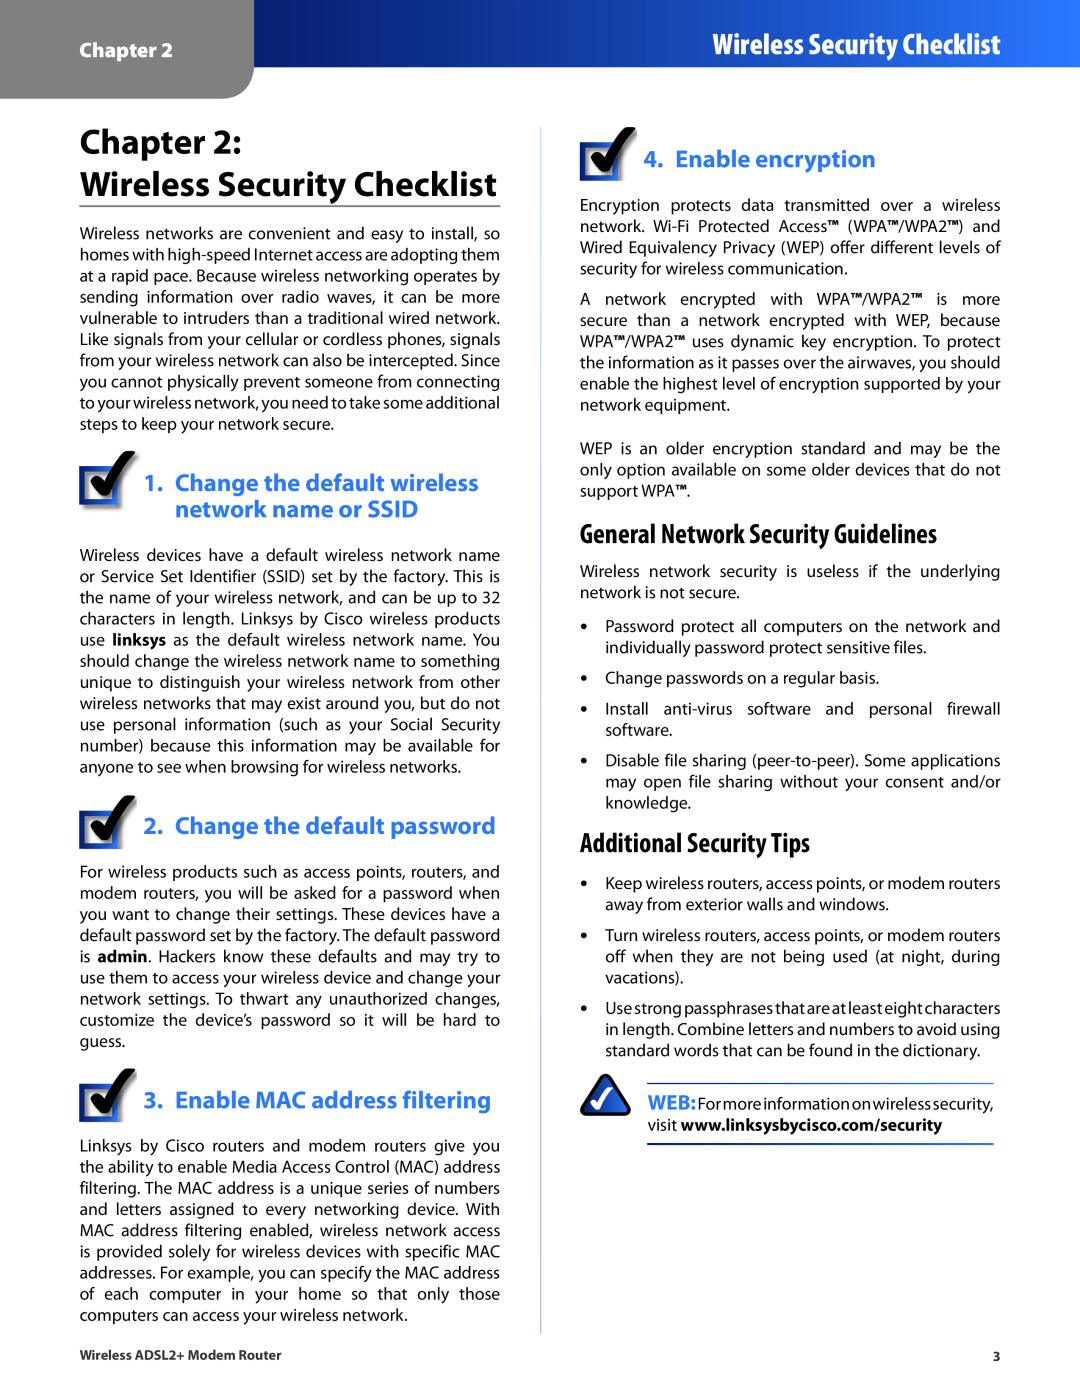 Linksys WAG320N manual Chapter Wireless Security Checklist, General Network Security Guidelines, Additional Security Tips 